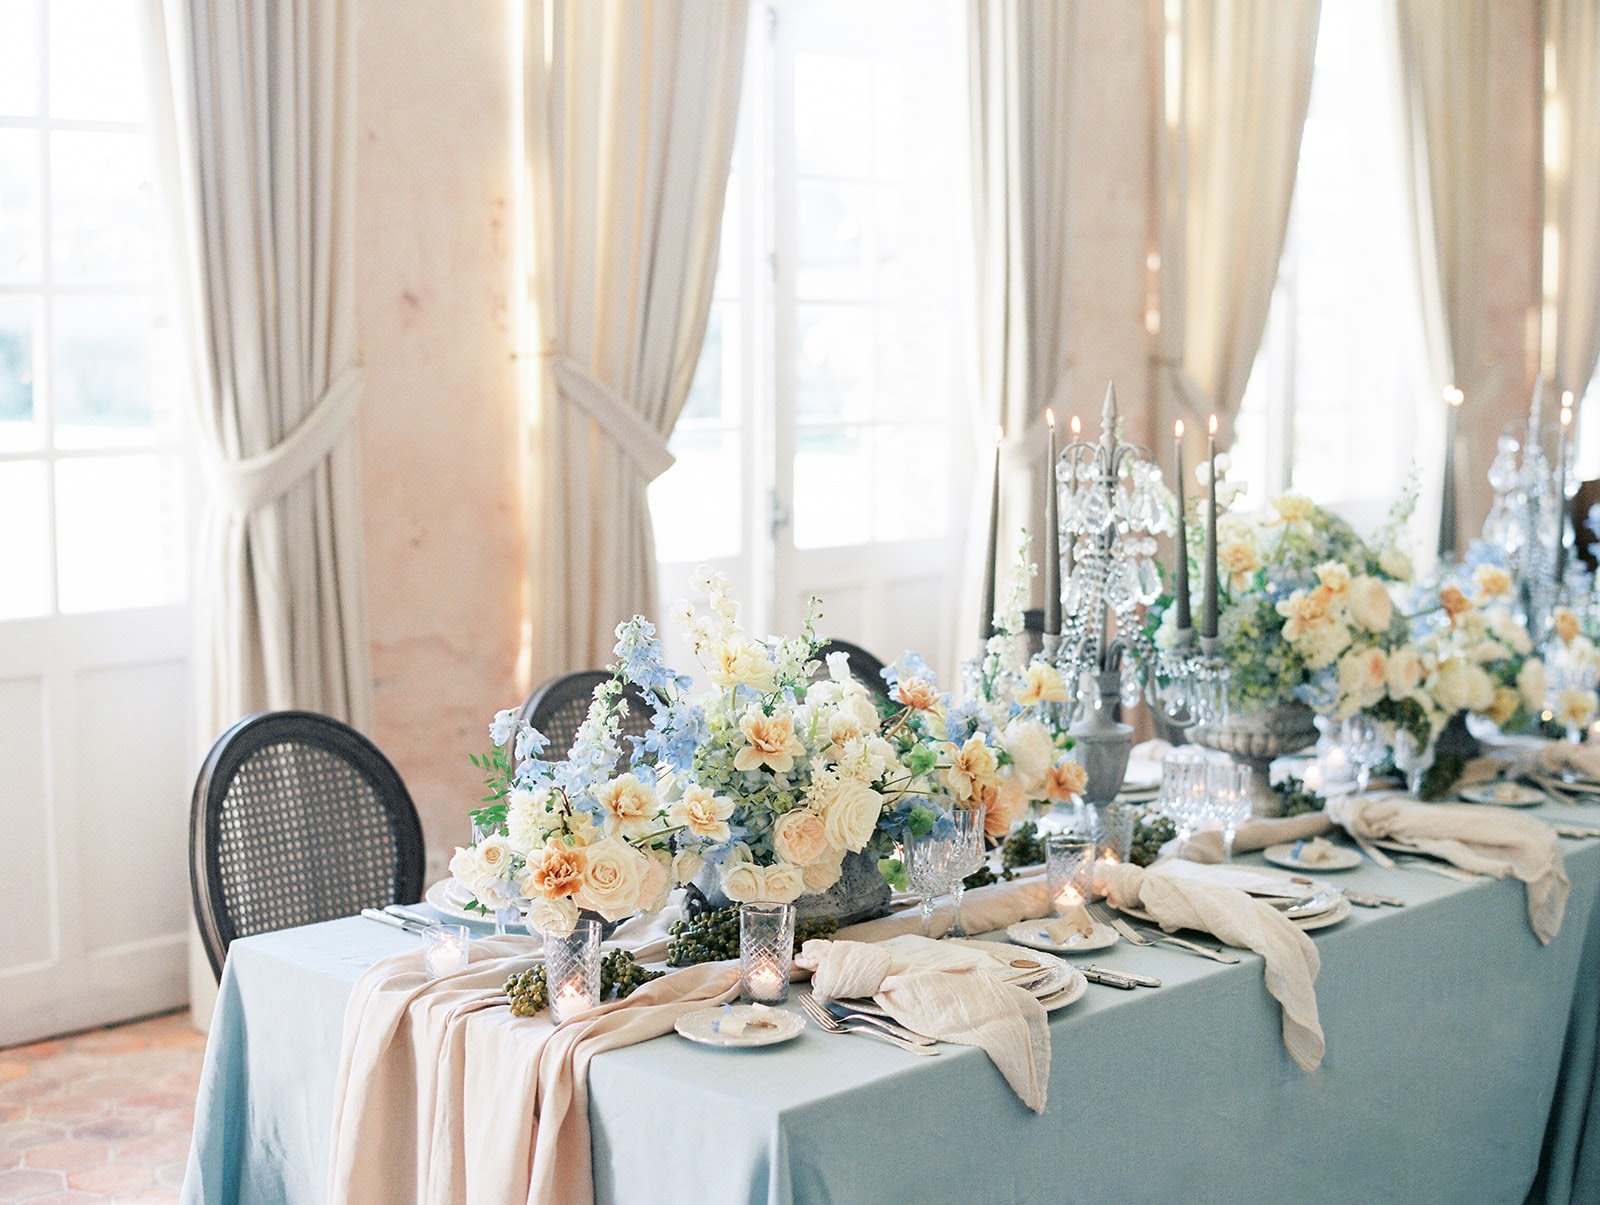 A table adorned with blue and white flowers at a chateau near Paris for a wedding.